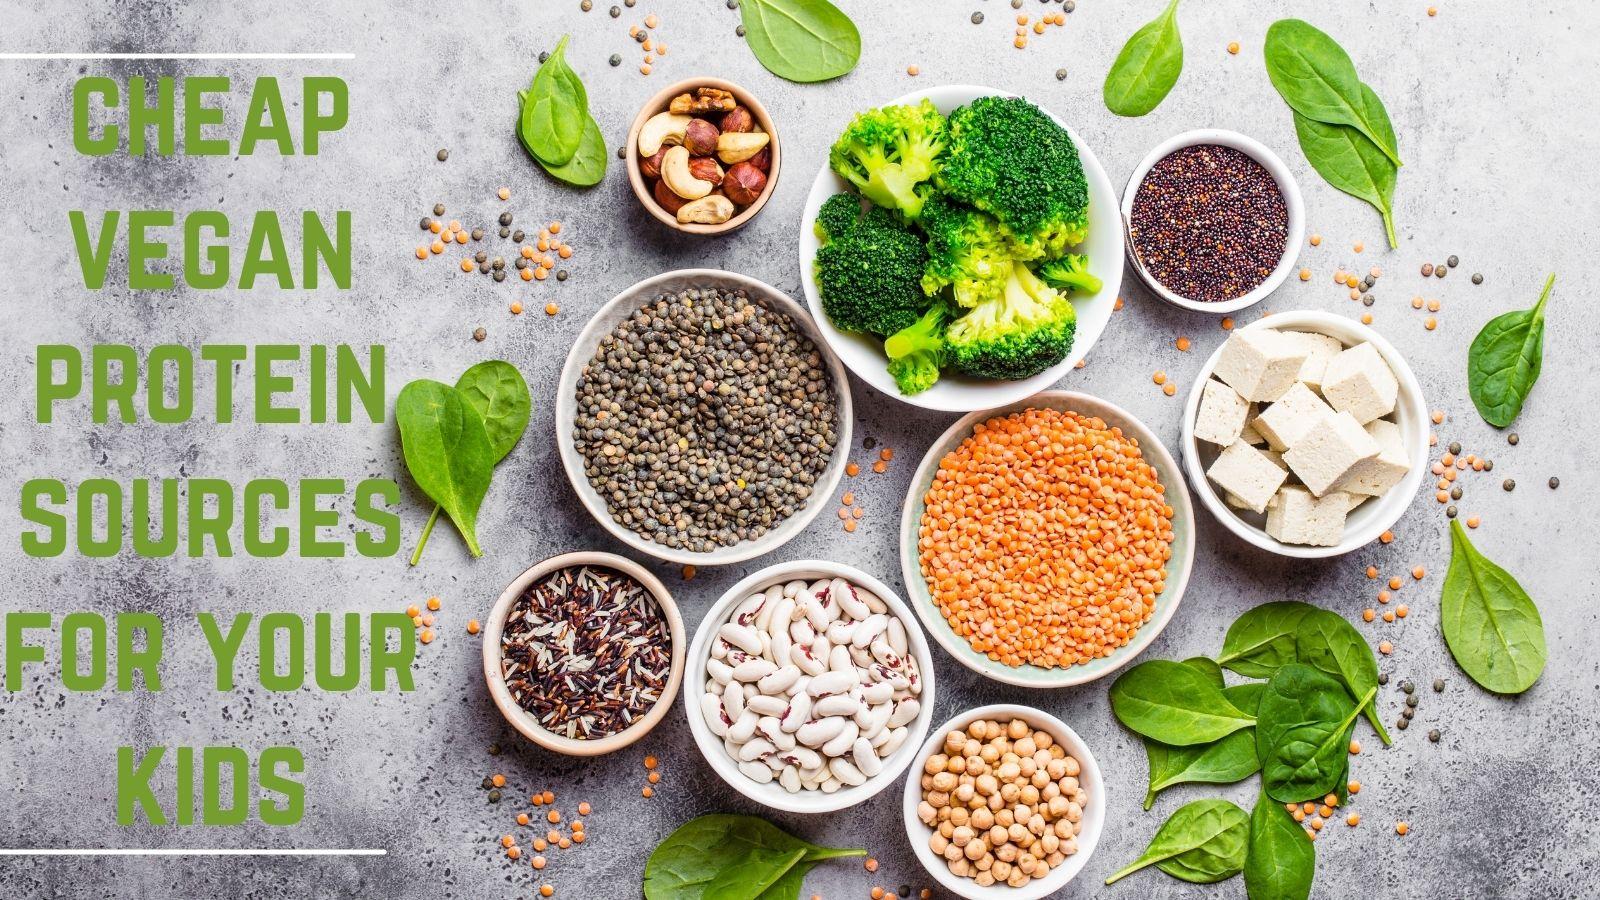 11 Essential Cheap Vegan Protein Sources For Your Kids